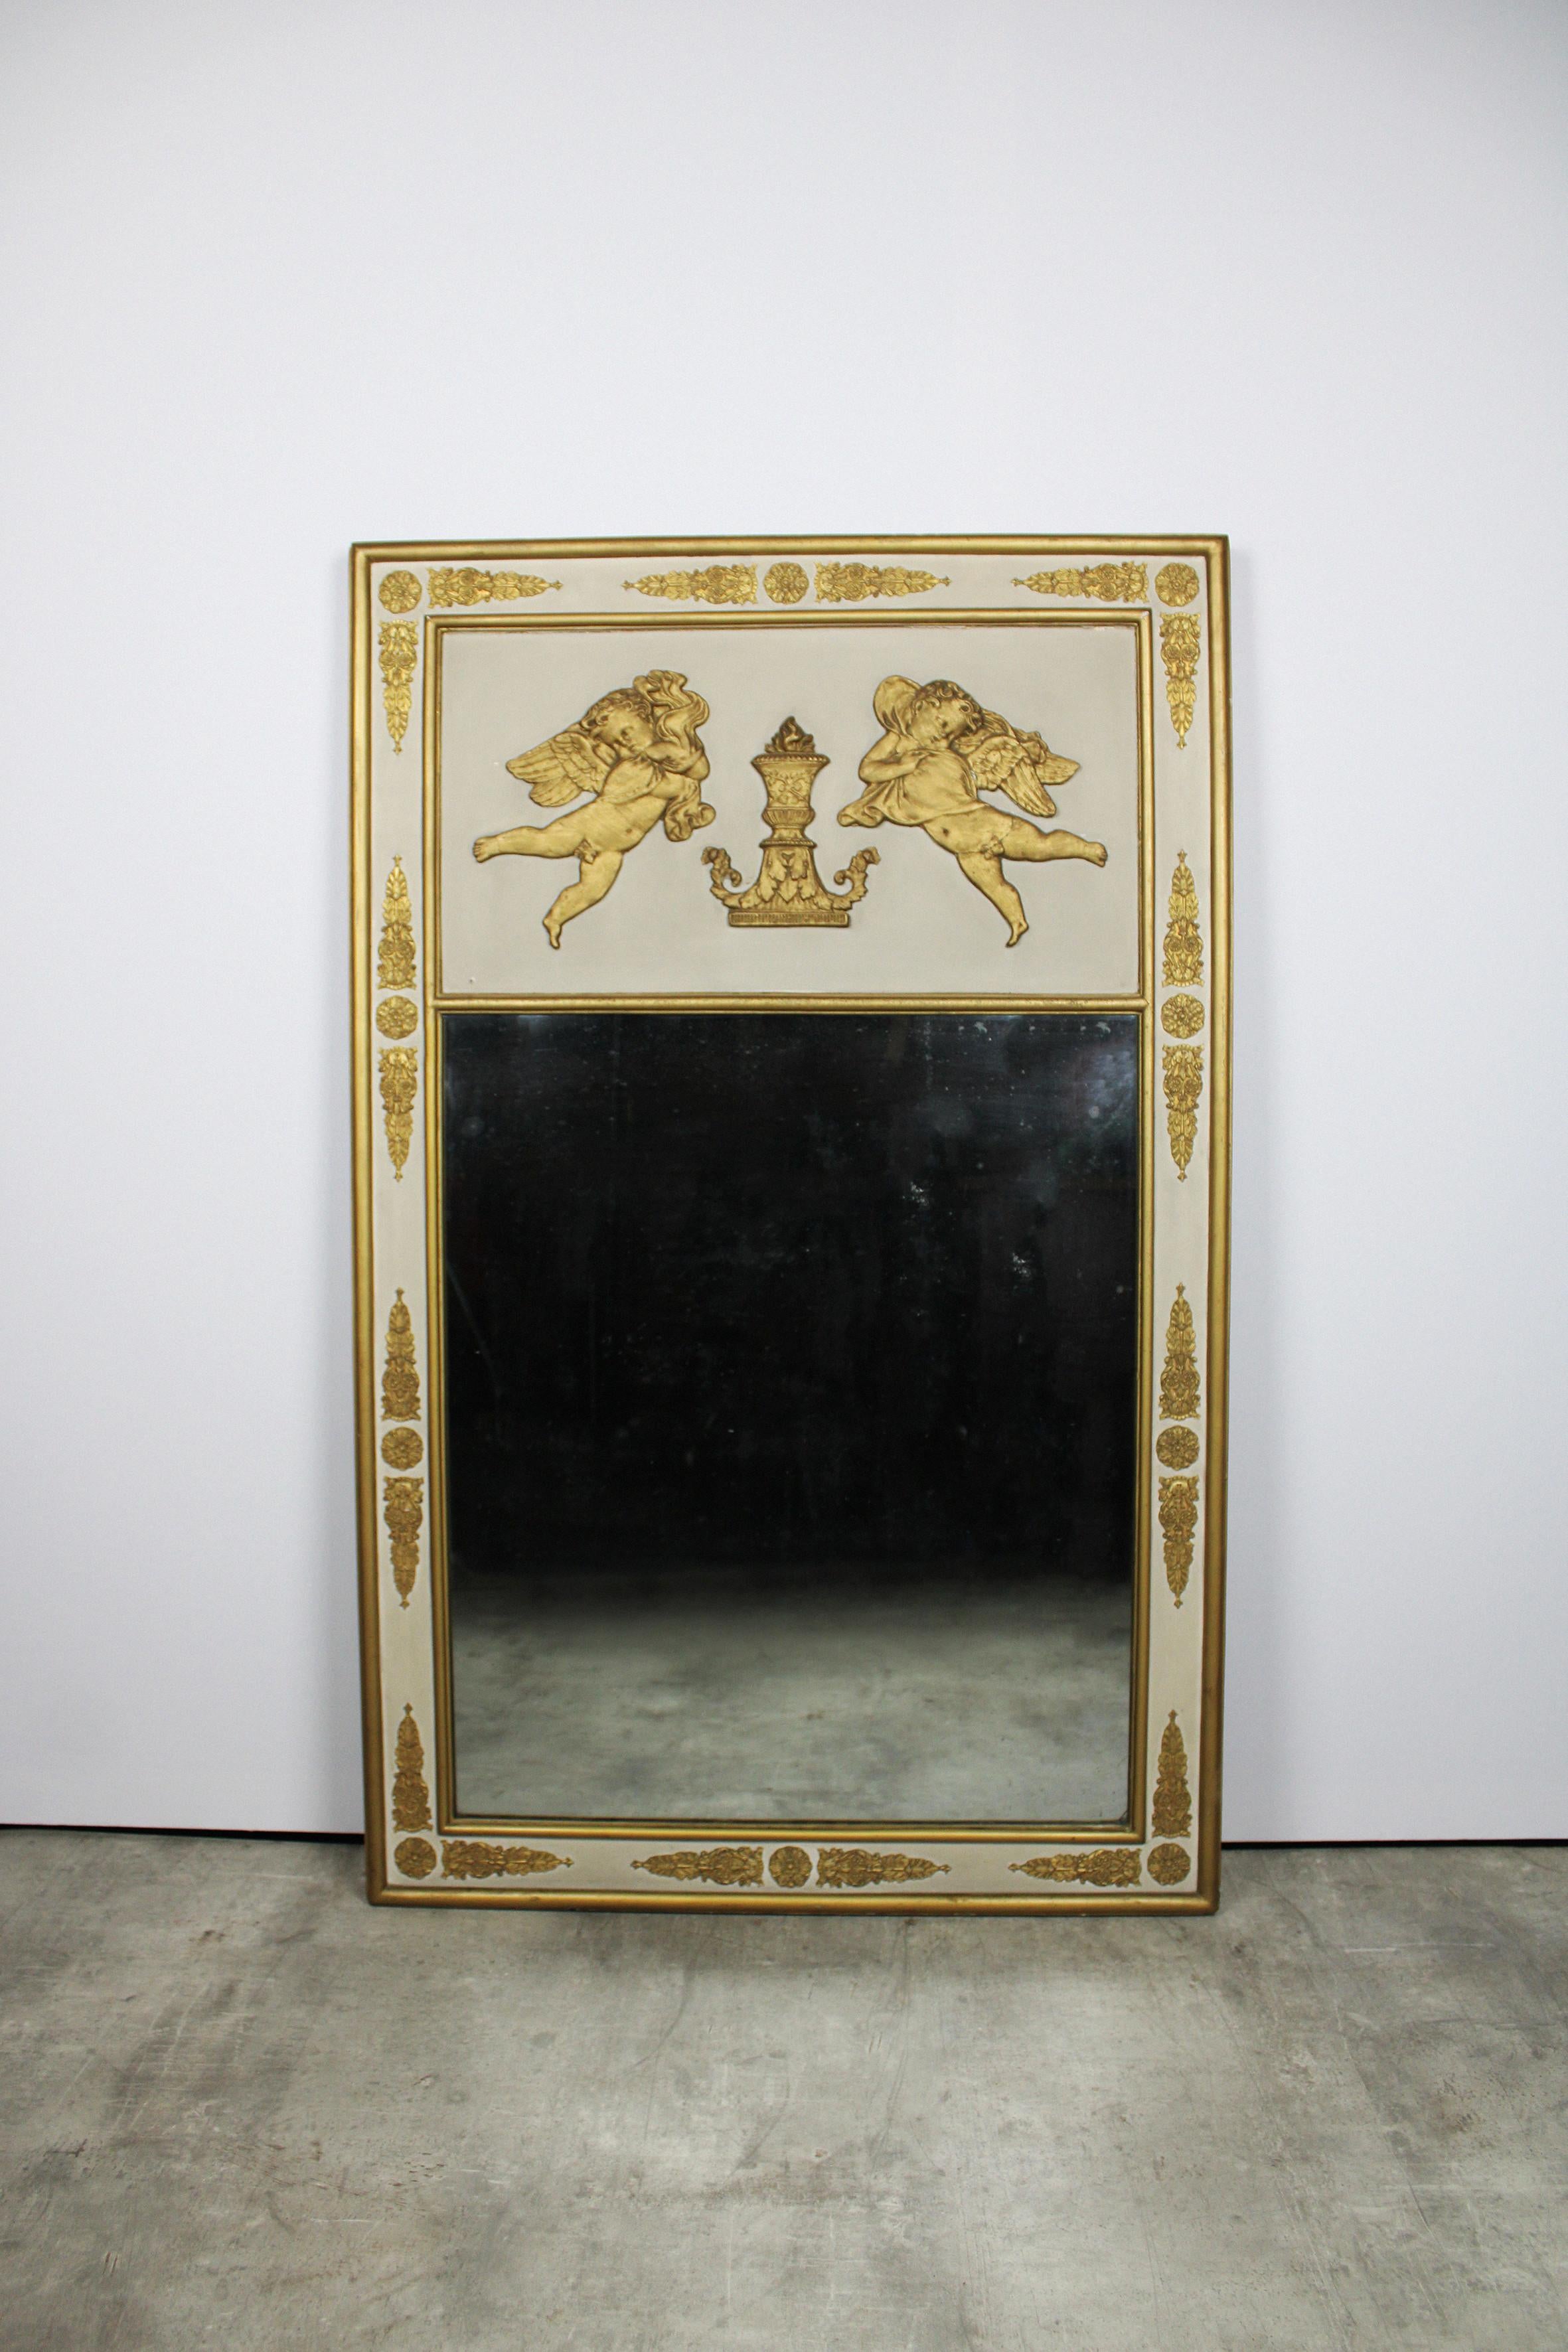 This 19th century mantel mirror hails from France, featuring a wooden and stucco frame adorned with gilded gold leaf. The rectangular pediment enhances the entire piece, showcasing a divine relief scene with two hovering angels and various